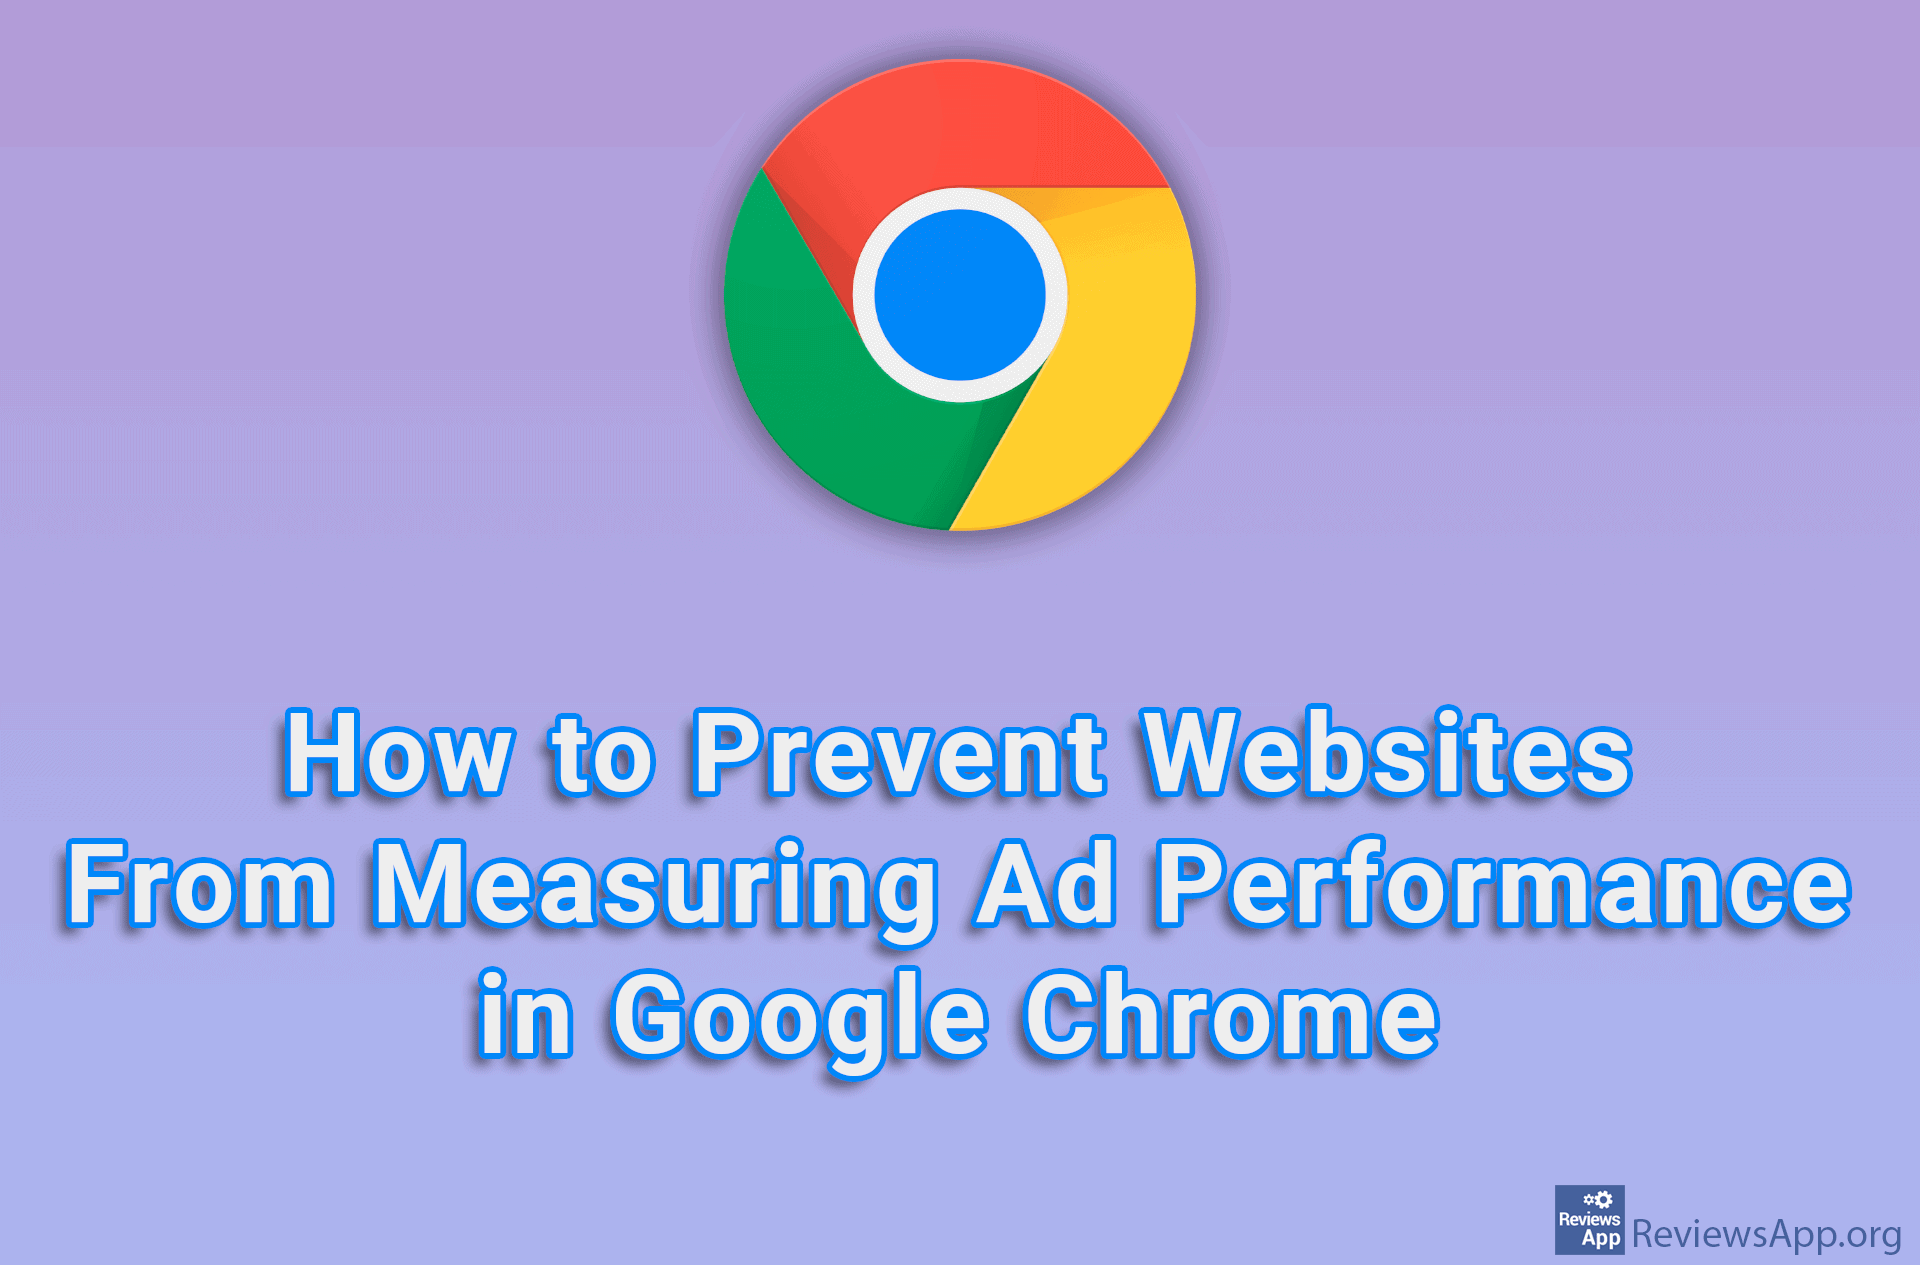 How to Prevent Websites From Measuring Ad Performance in Google Chrome